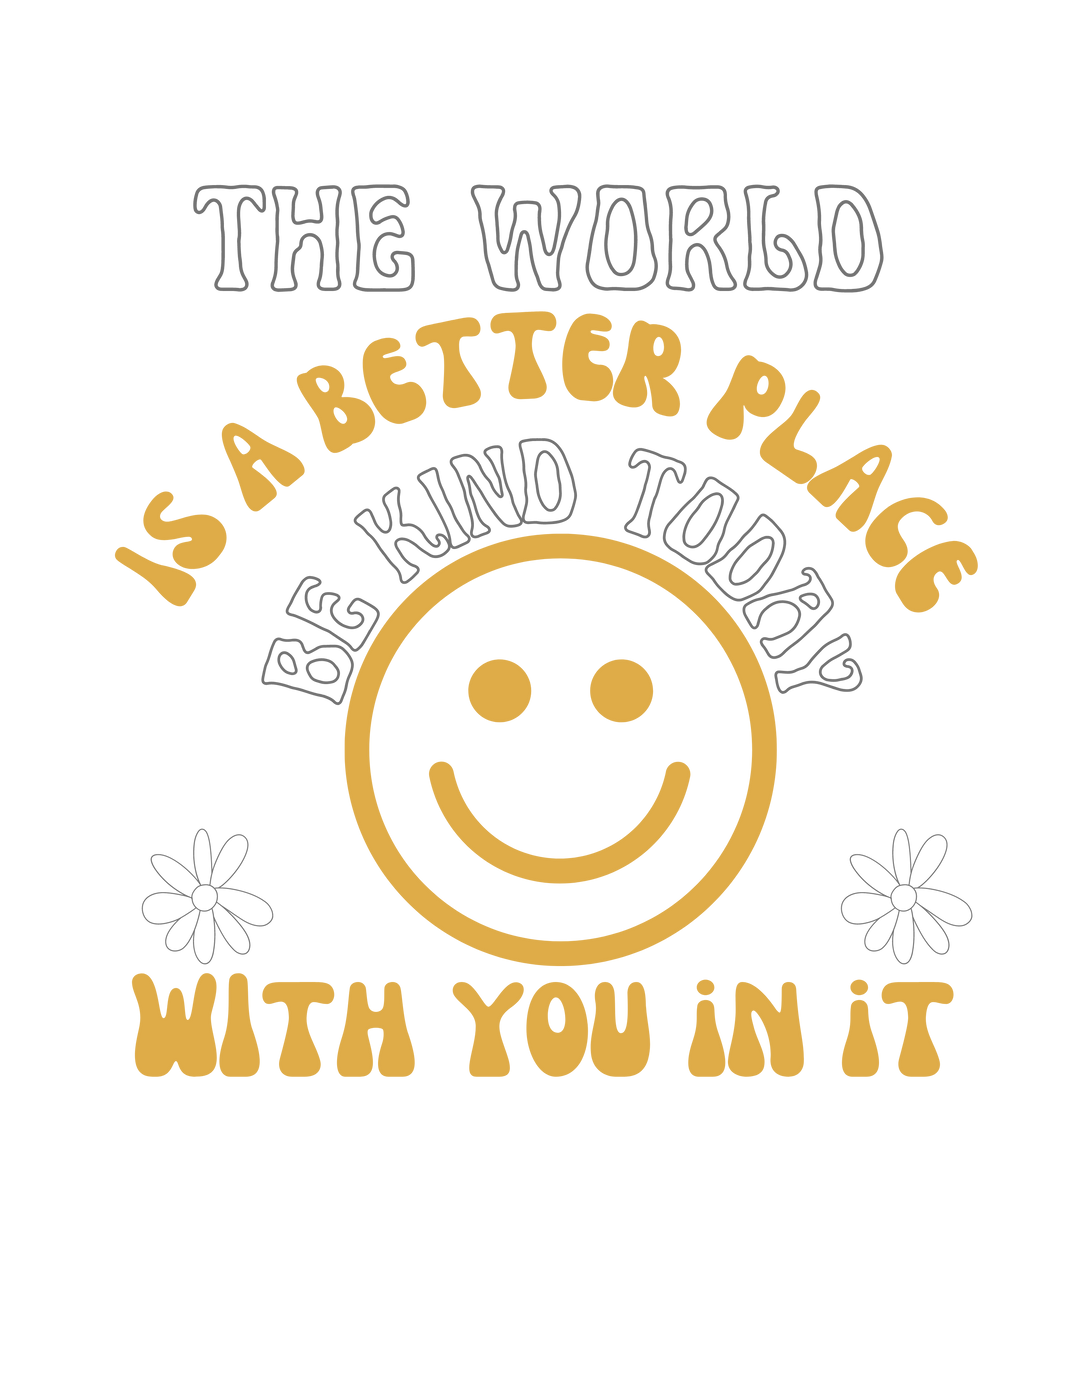 A Be Kind Today Hoodie featuring a yellow and black smiley face design. Unisex heavy blend, 50% cotton, 50% polyester, with kangaroo pocket and drawstring hood. Medium-heavy fabric, classic fit.